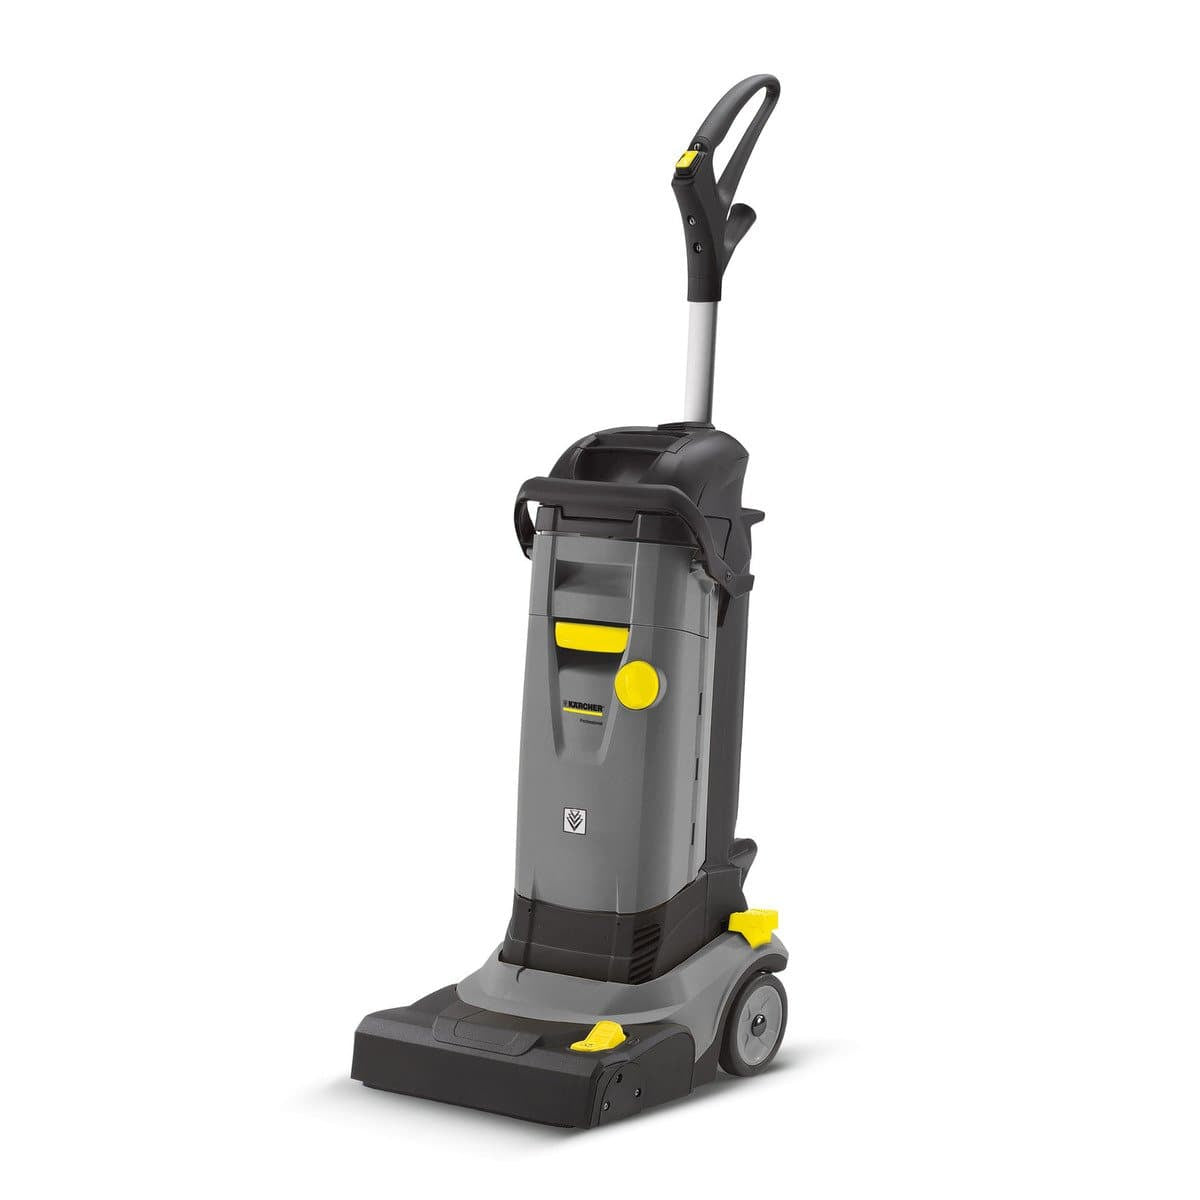 Karcher Hot and Cold High Pressure Washer 160 Bar - HDS-E 8/16-4 M 24 kW | Supply Master | Accra, Ghana Tools Building Steel Engineering Hardware tool